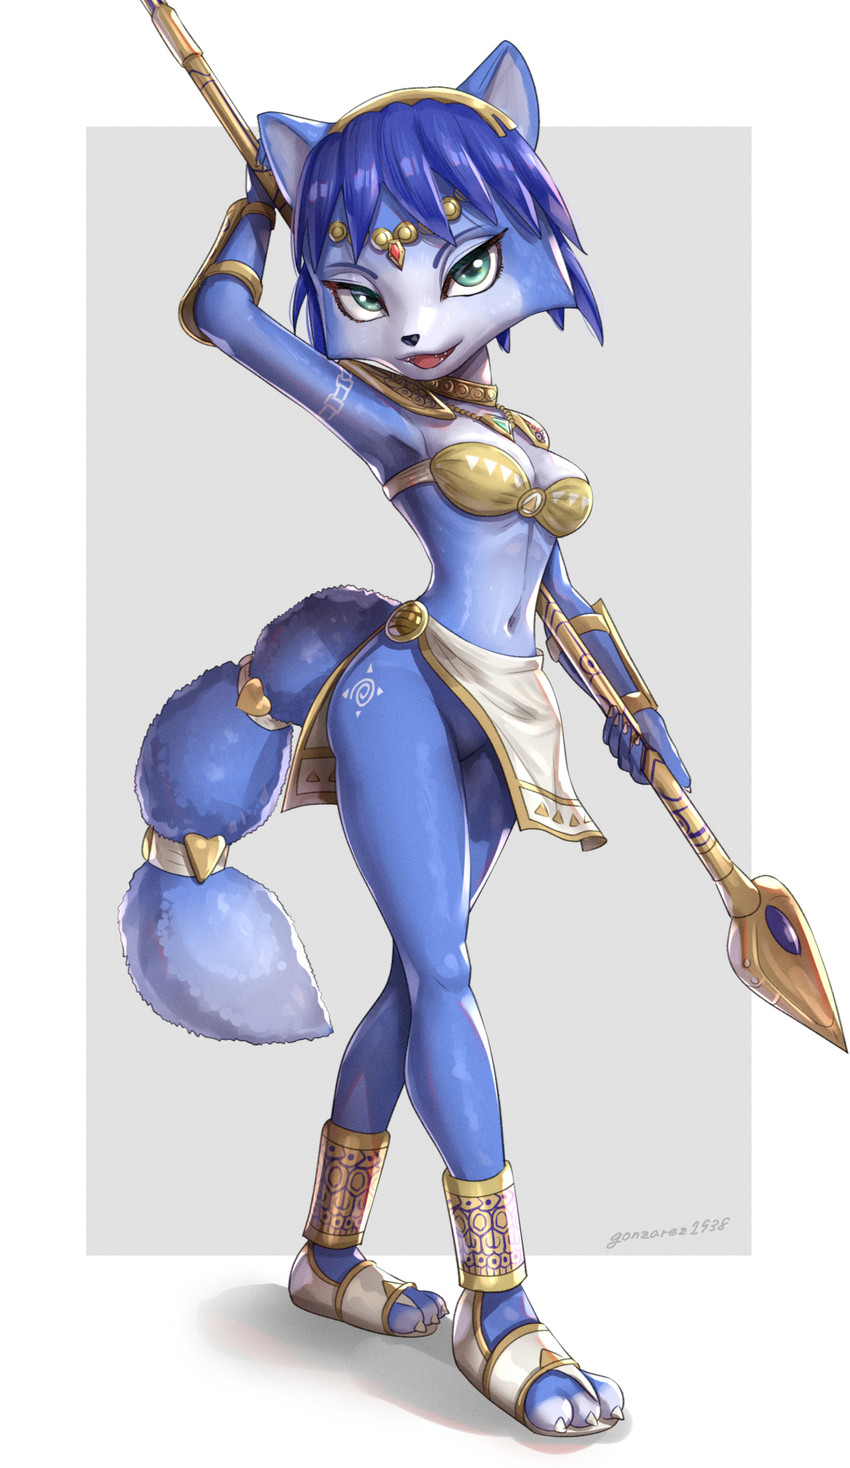 krystal (super smash bros. ultimate and etc) created by gonzarez1938